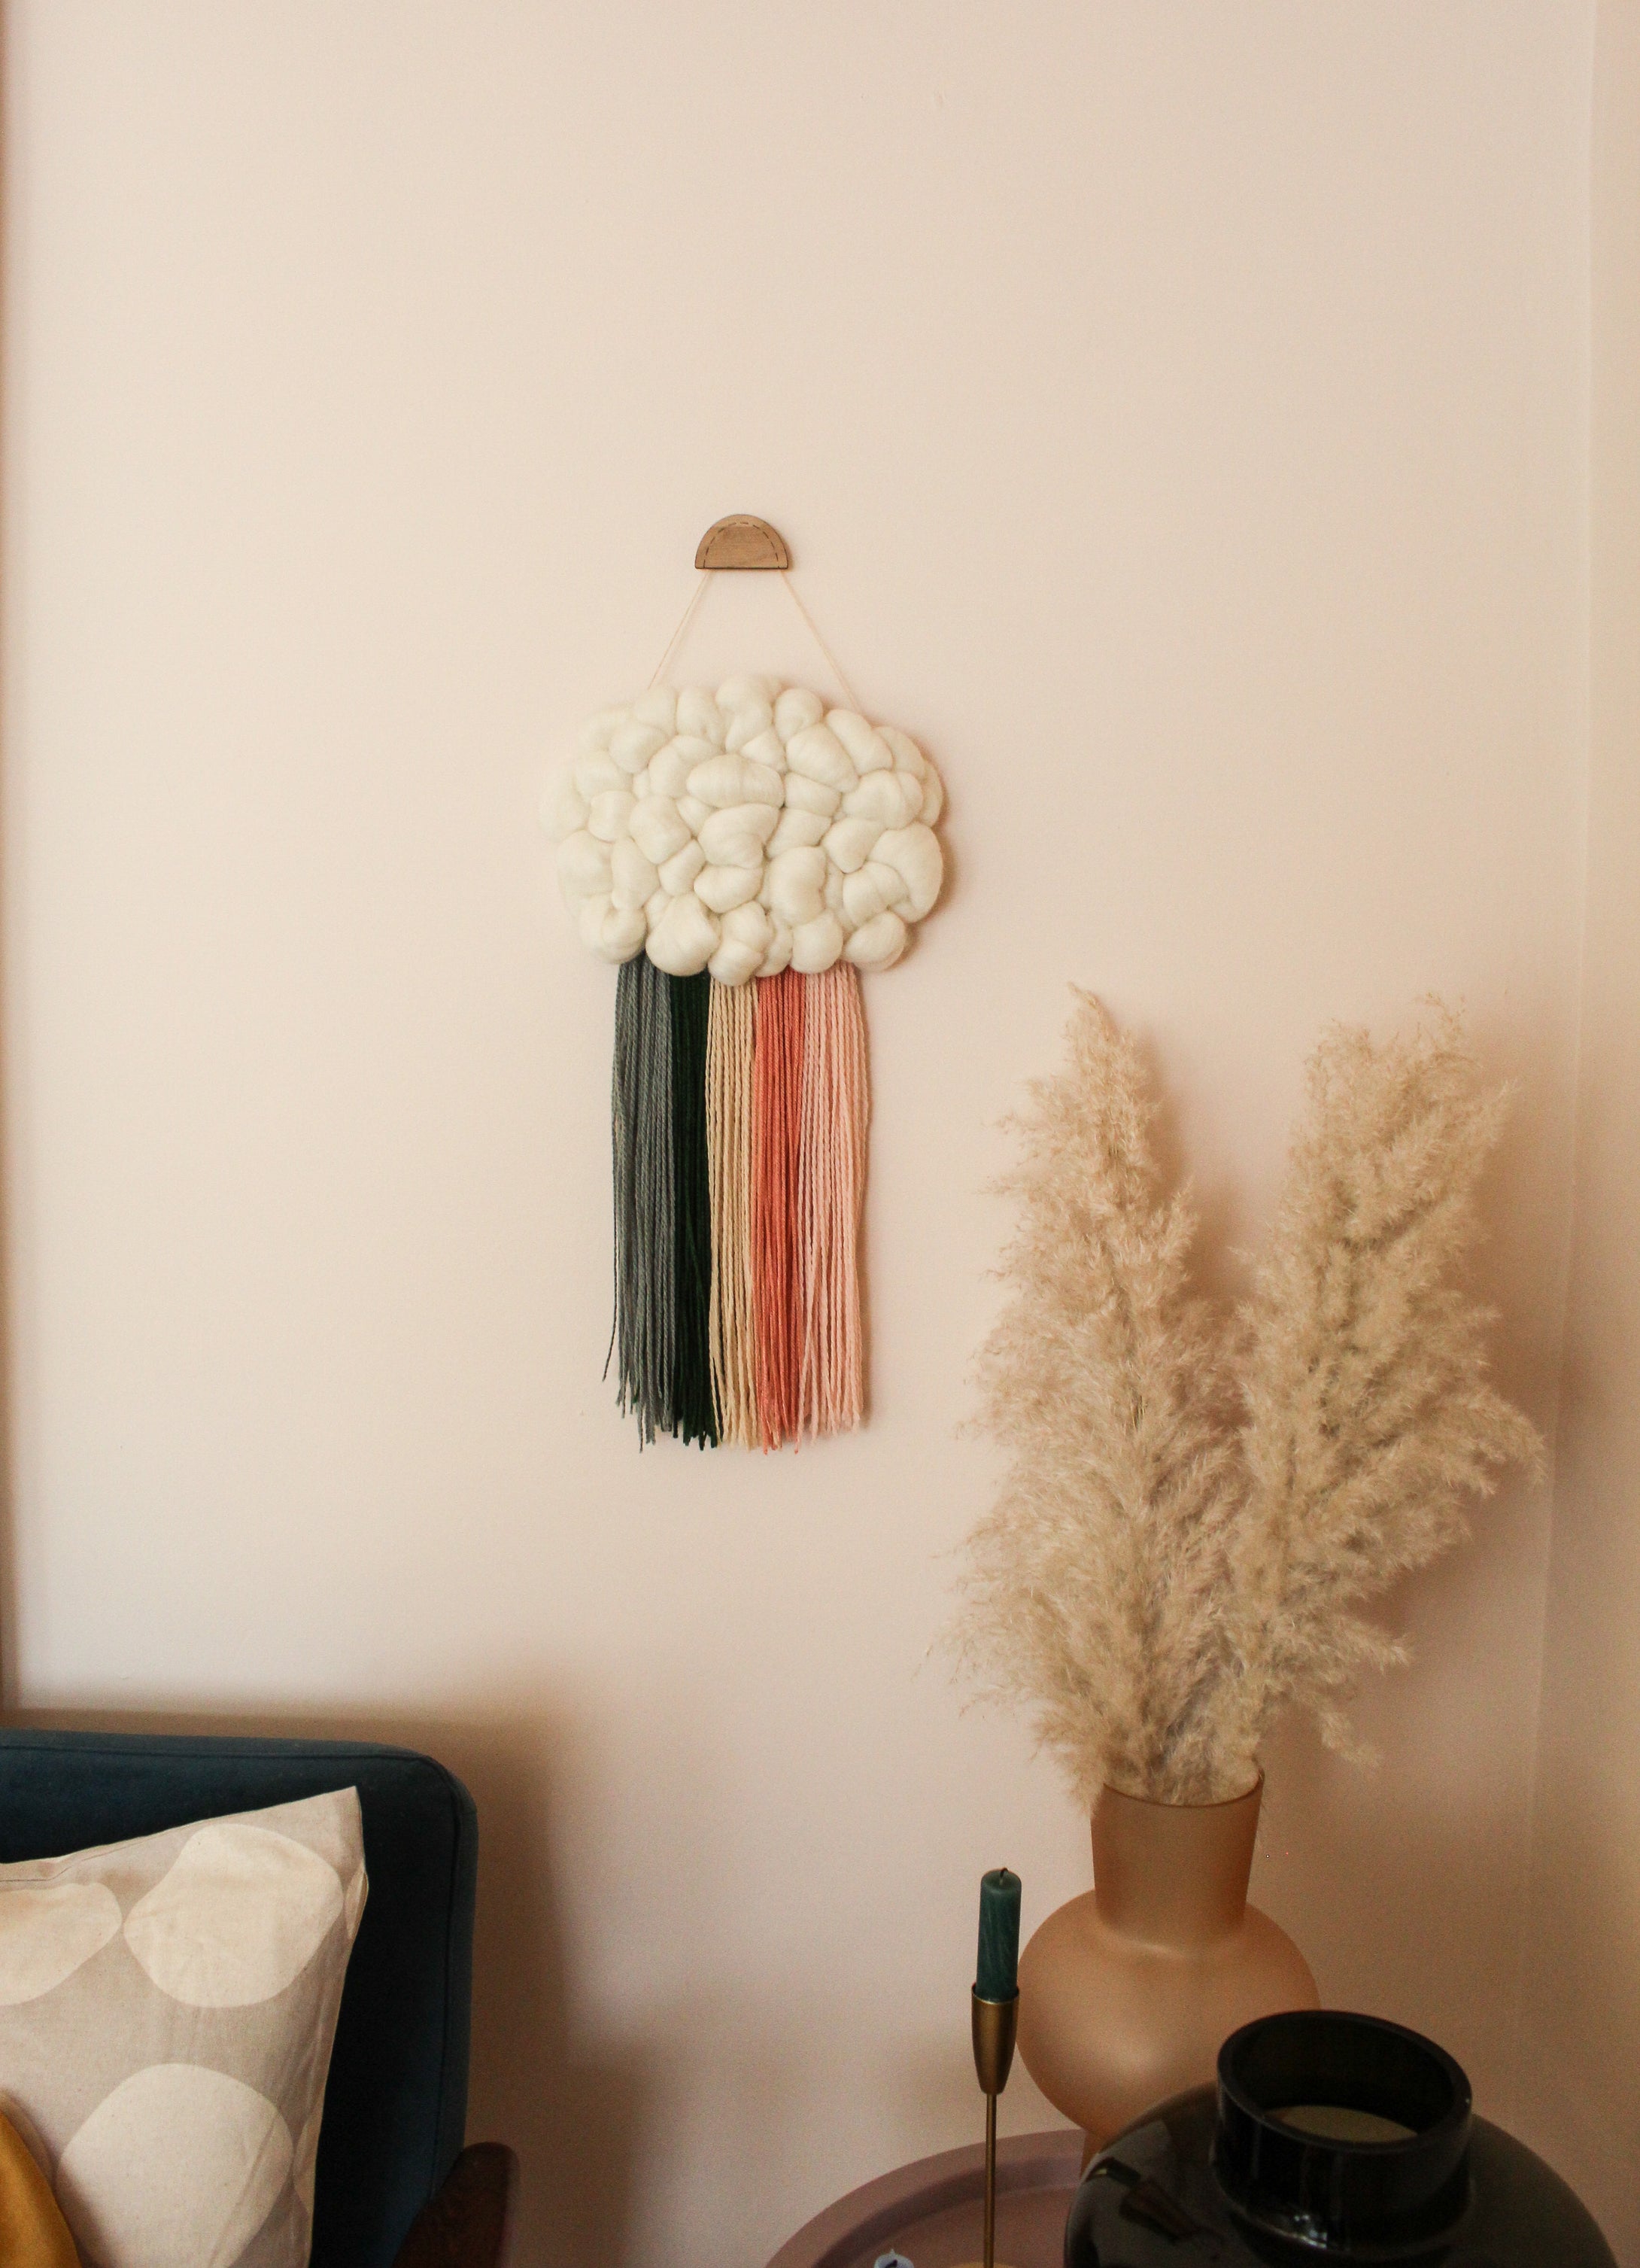 Cloud Woven Wall Hanging in Pinks and Greens Mix